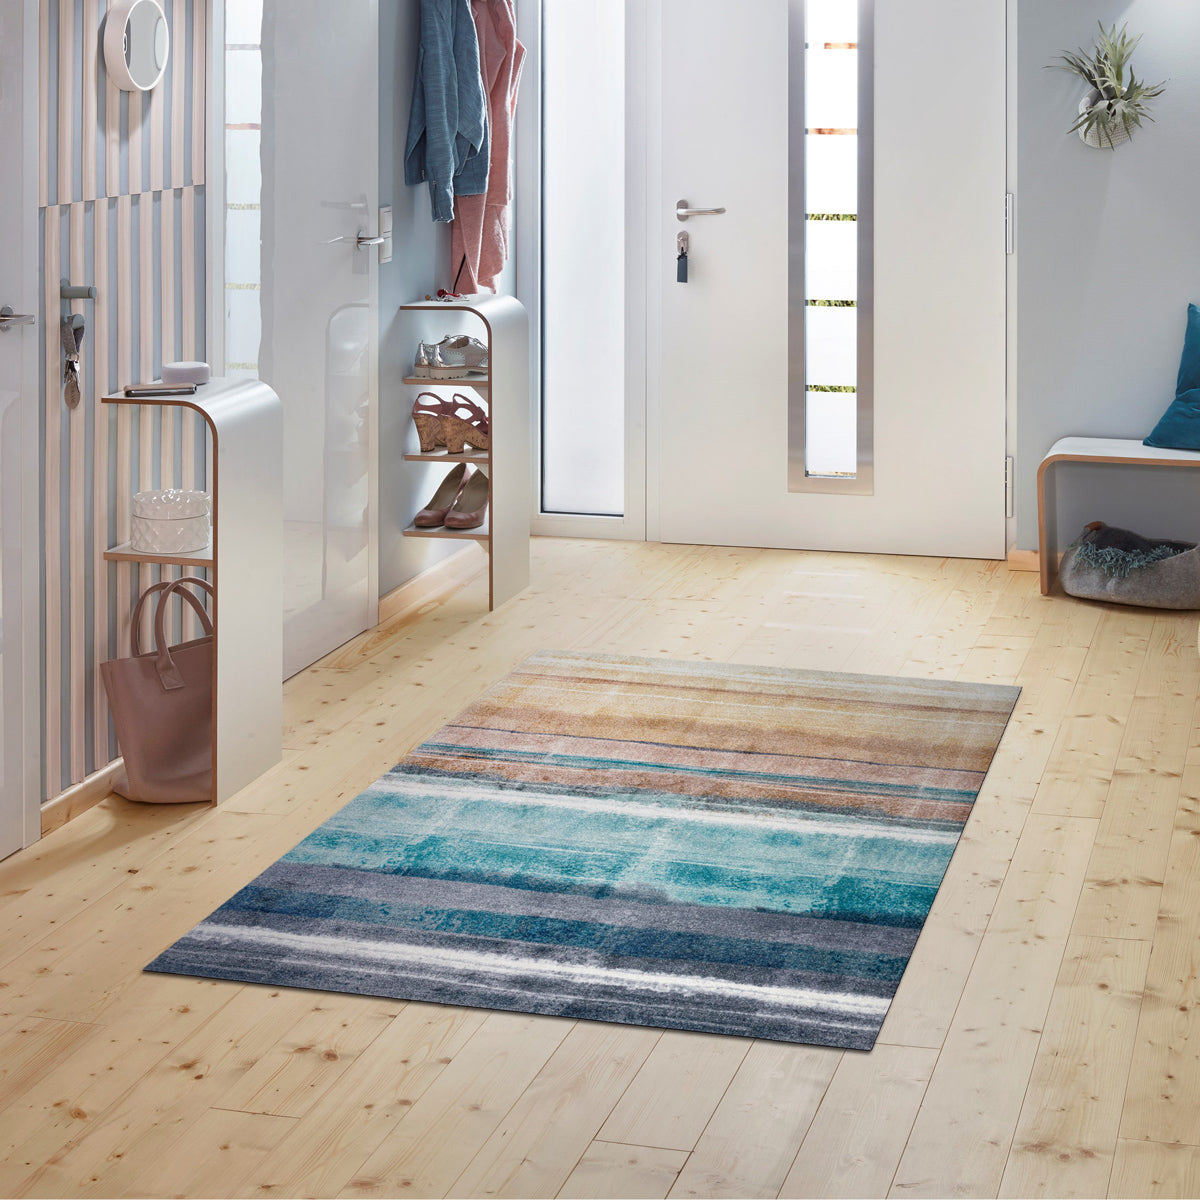 Here you will find the 10 best reasons for a wash+dry decor mat: